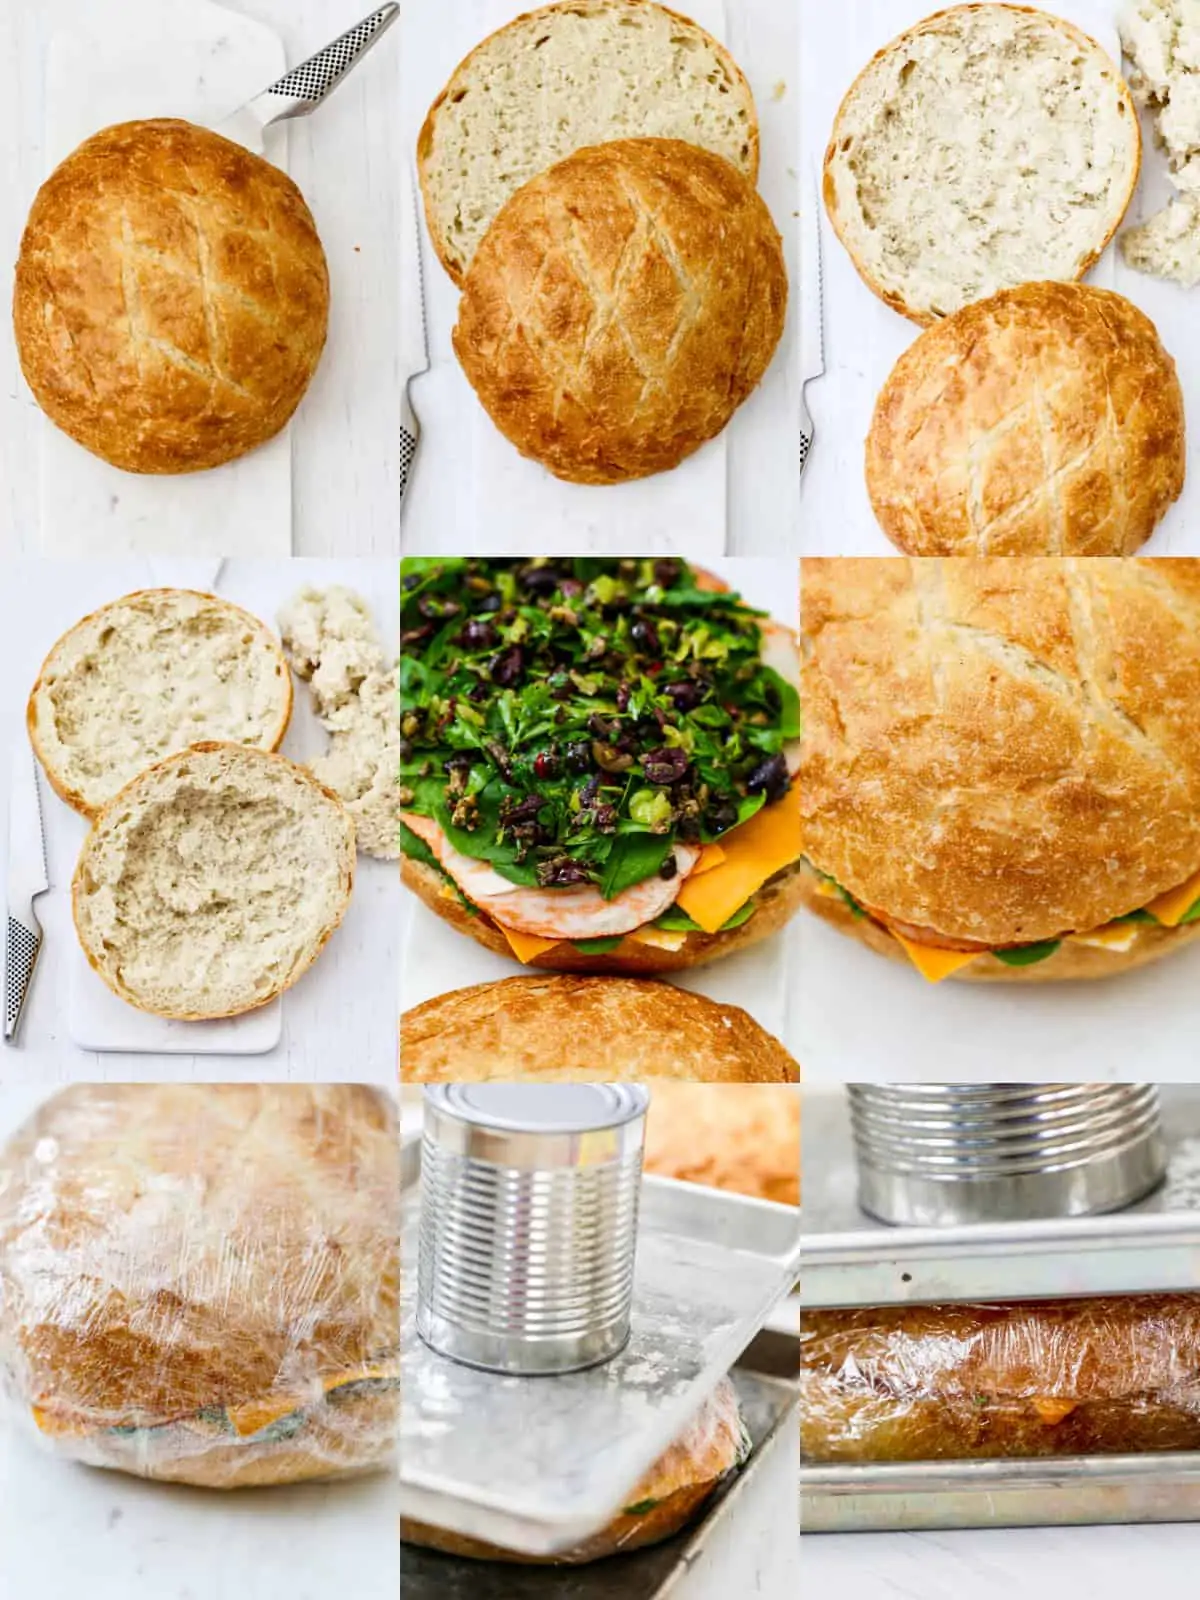 Showing how to make pressed picnic sandwiches step by step.